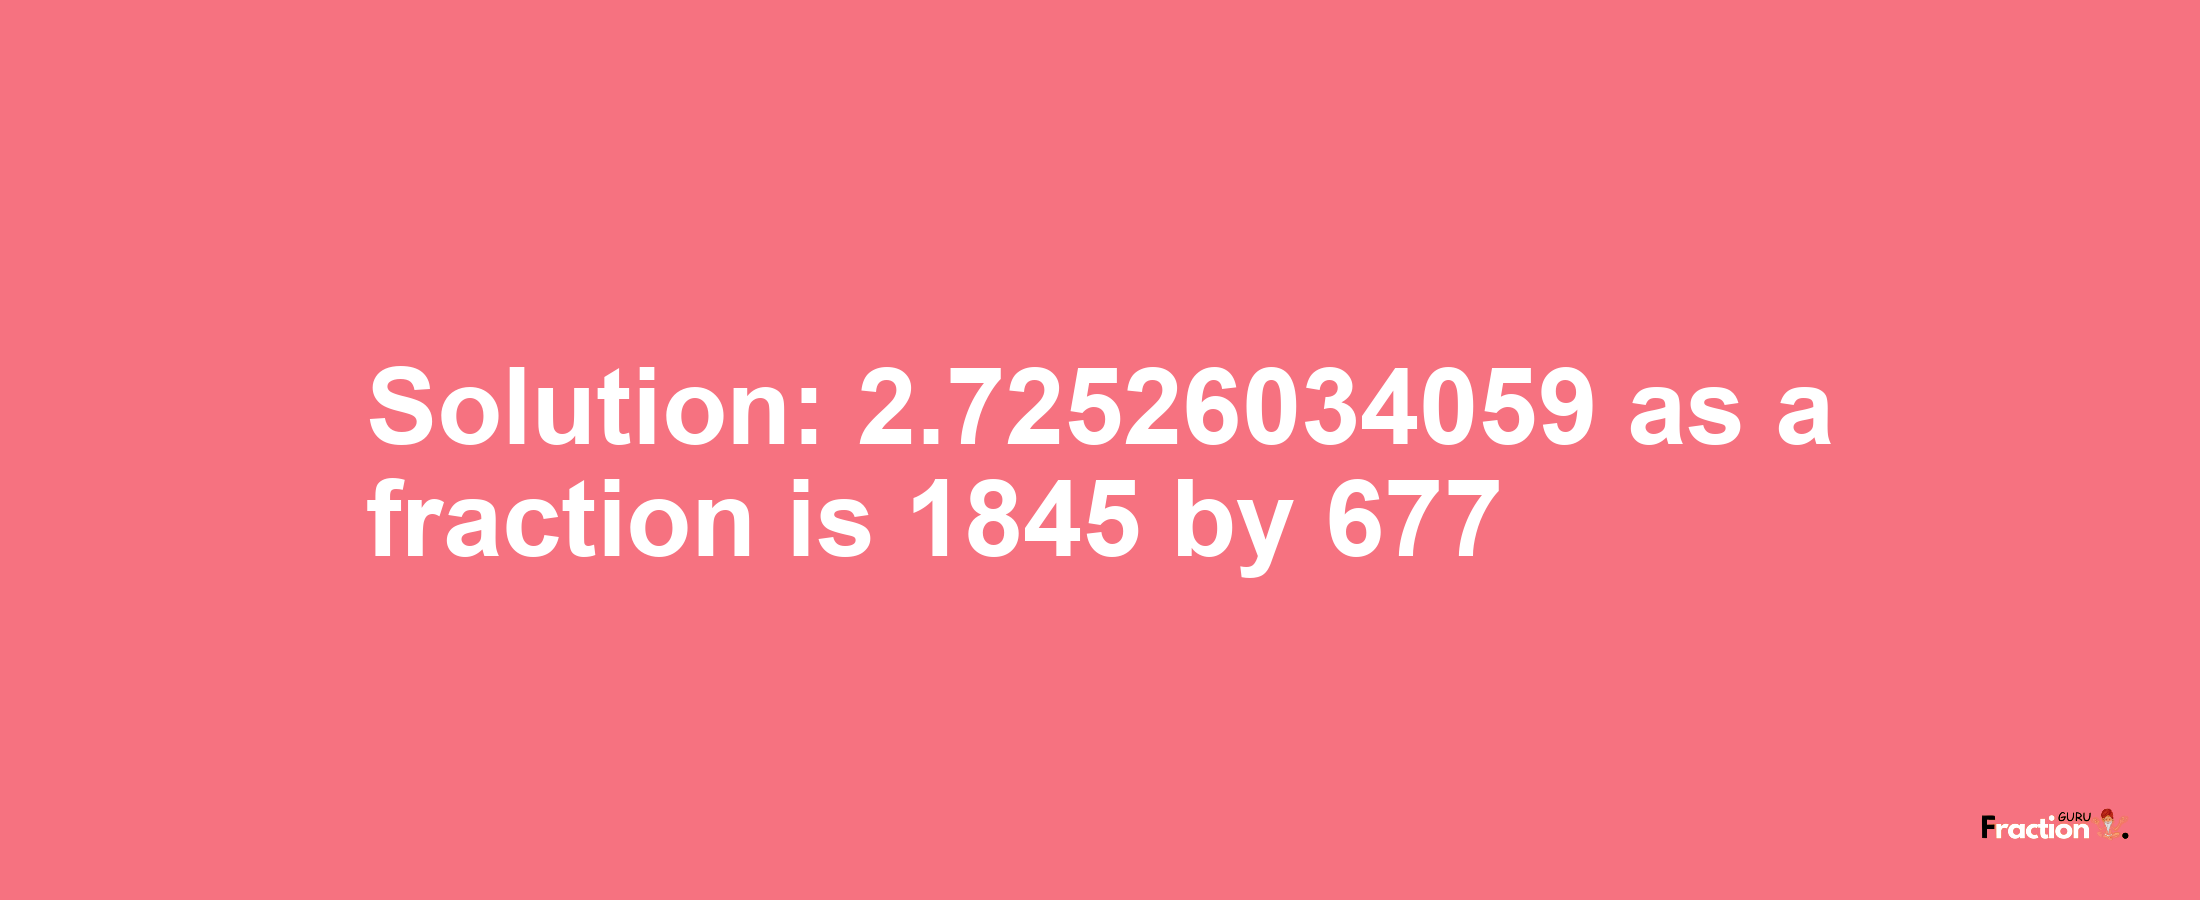 Solution:2.72526034059 as a fraction is 1845/677